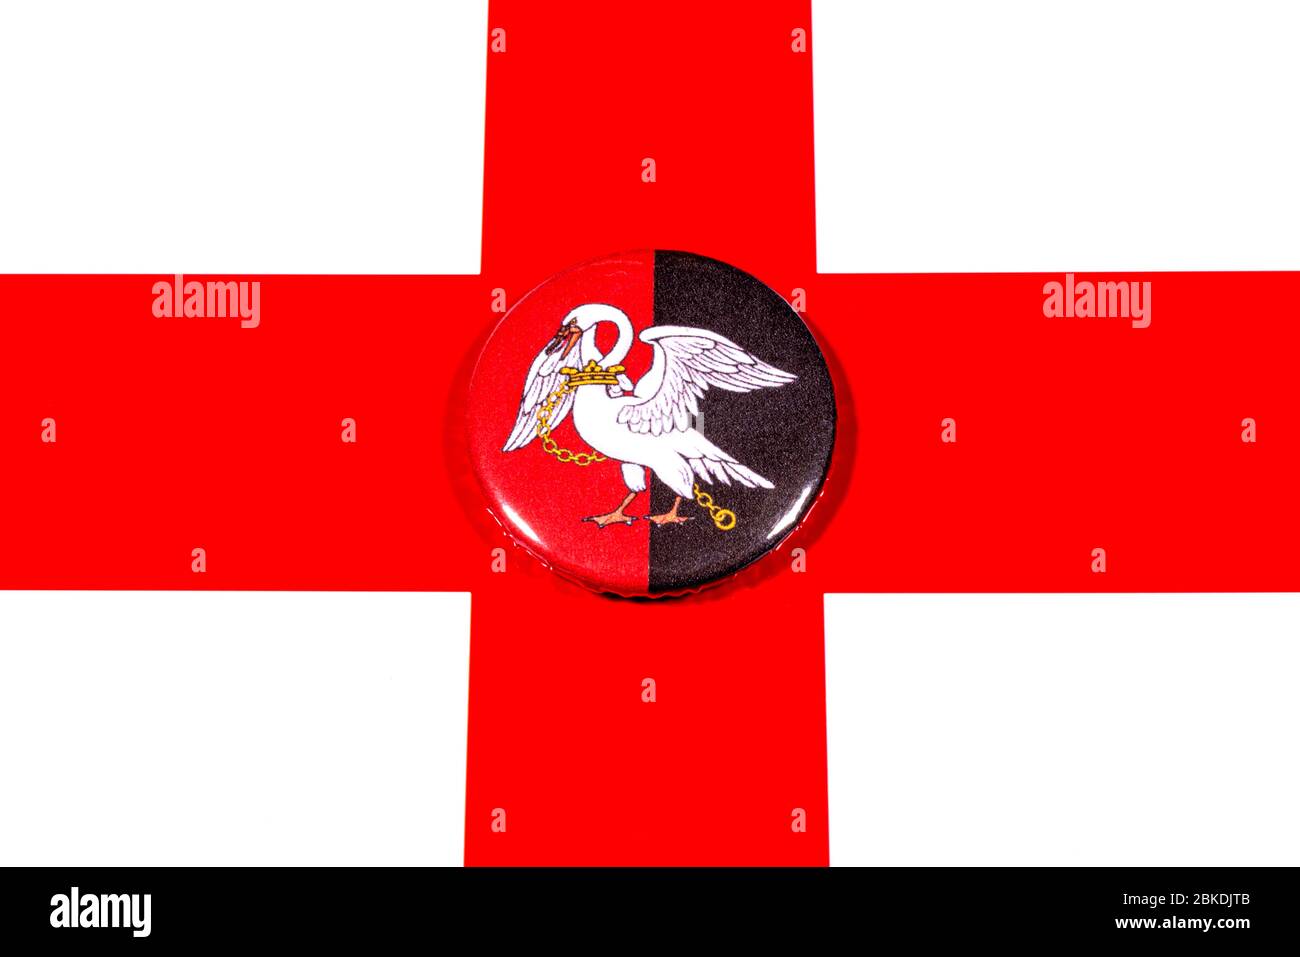 A badge portraying the flag of the English county of Buckinghamshire pictured over the England flag. Stock Photo